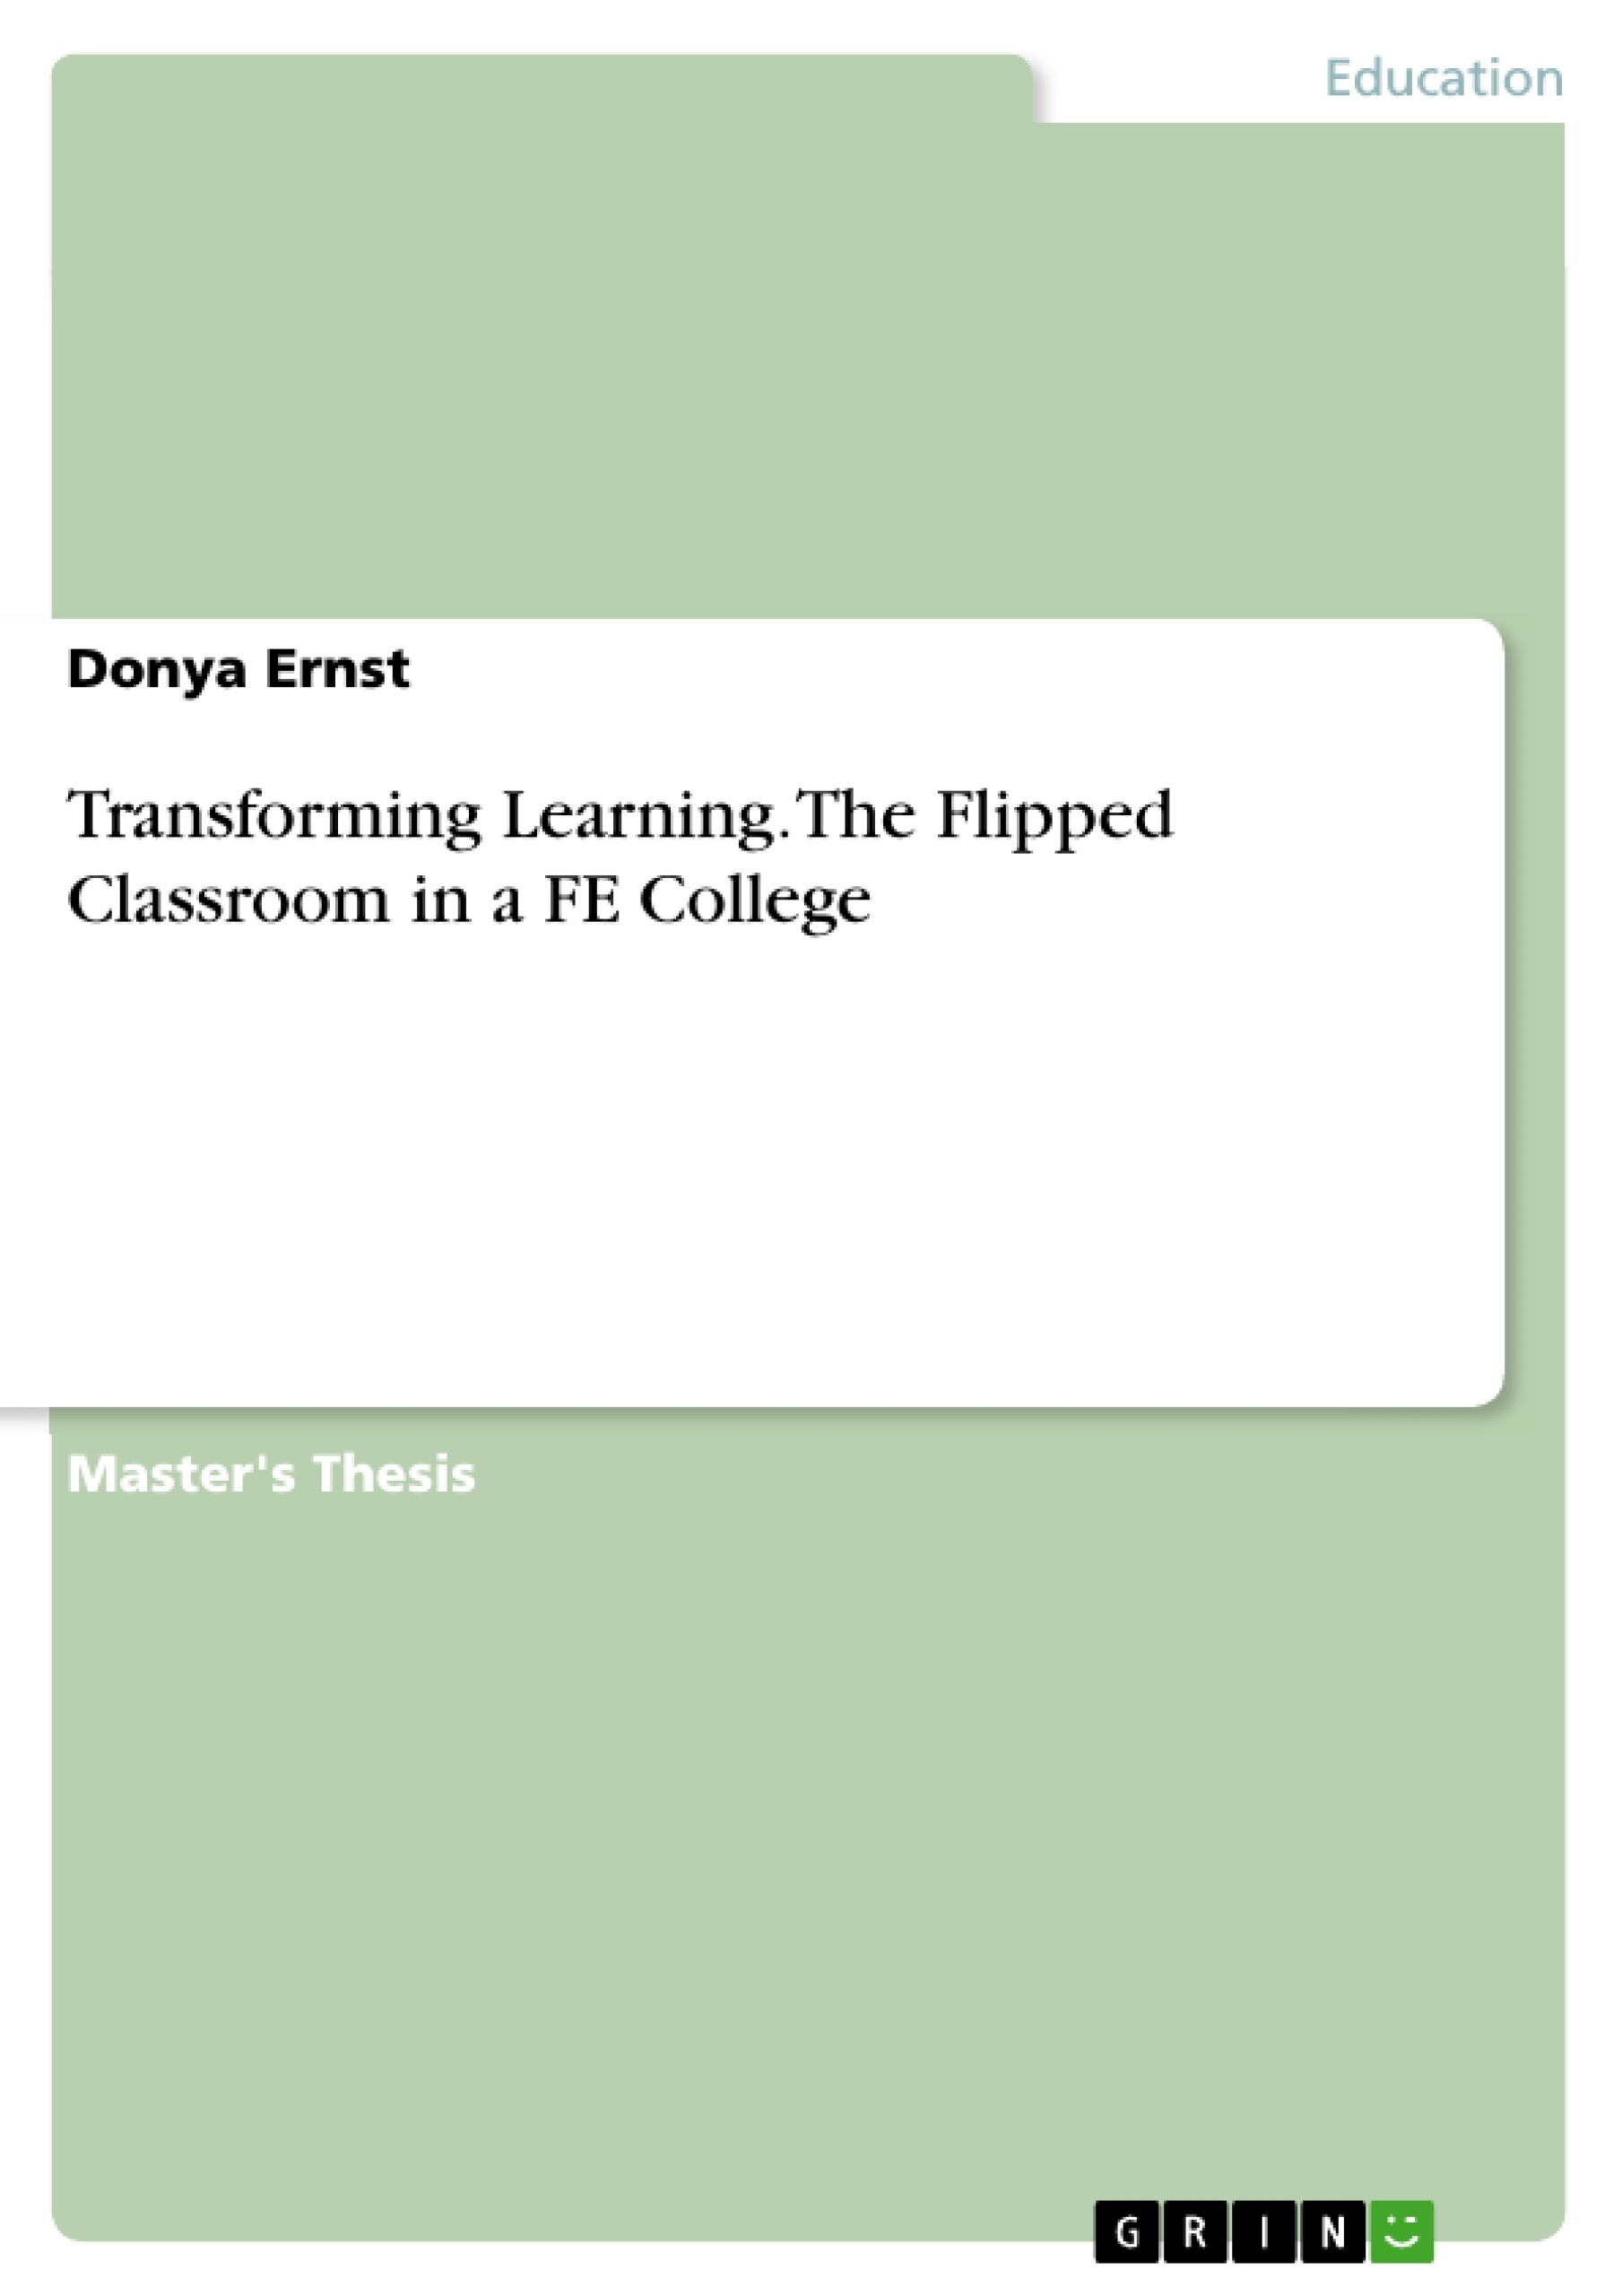 Title: Transforming Learning. The Flipped Classroom in a FE College